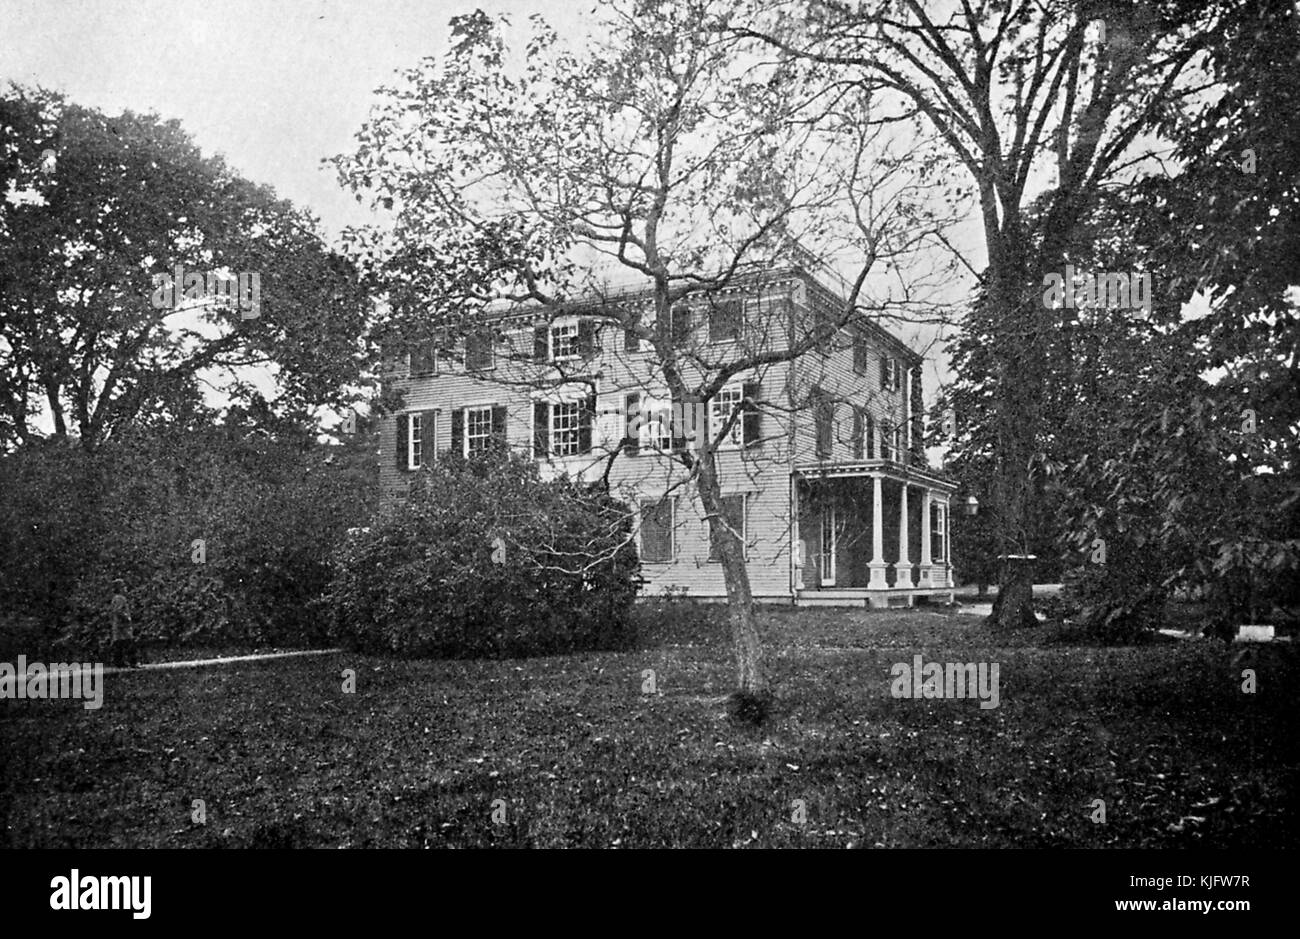 Photograph of Elmwood, historic house built around 1767, known for several prominent former residents, including, Thomas Oliver, royal Lieutenant Governor of Massachusetts, Elbridge Gerry, signer of the United States Declaration of Independence and Vice President of the United States, and James Russell Lowell (18191891), noted American writer, poet, and foreign diplomat, Cambridge, Massachusets, Boston, Massachusetts, 1913. Stock Photo